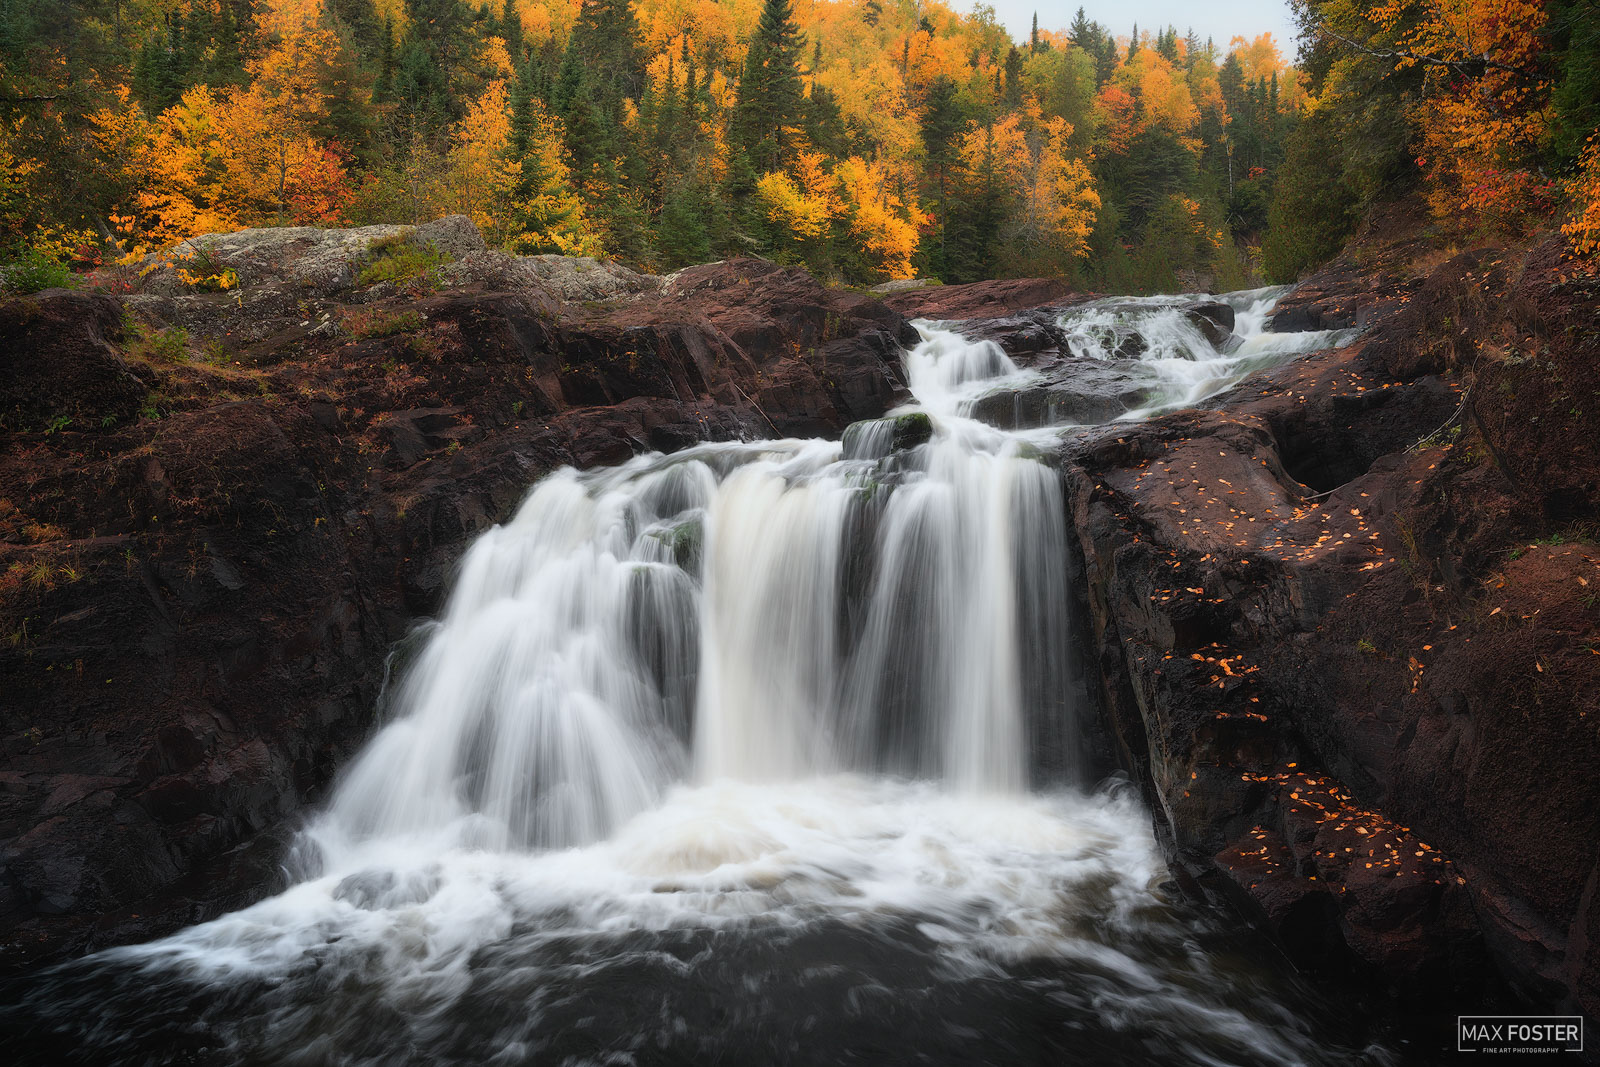 Add color to your walls with Blazing Falls, Max Foster's limited edition photography print of Judge CR Magney State Park from...